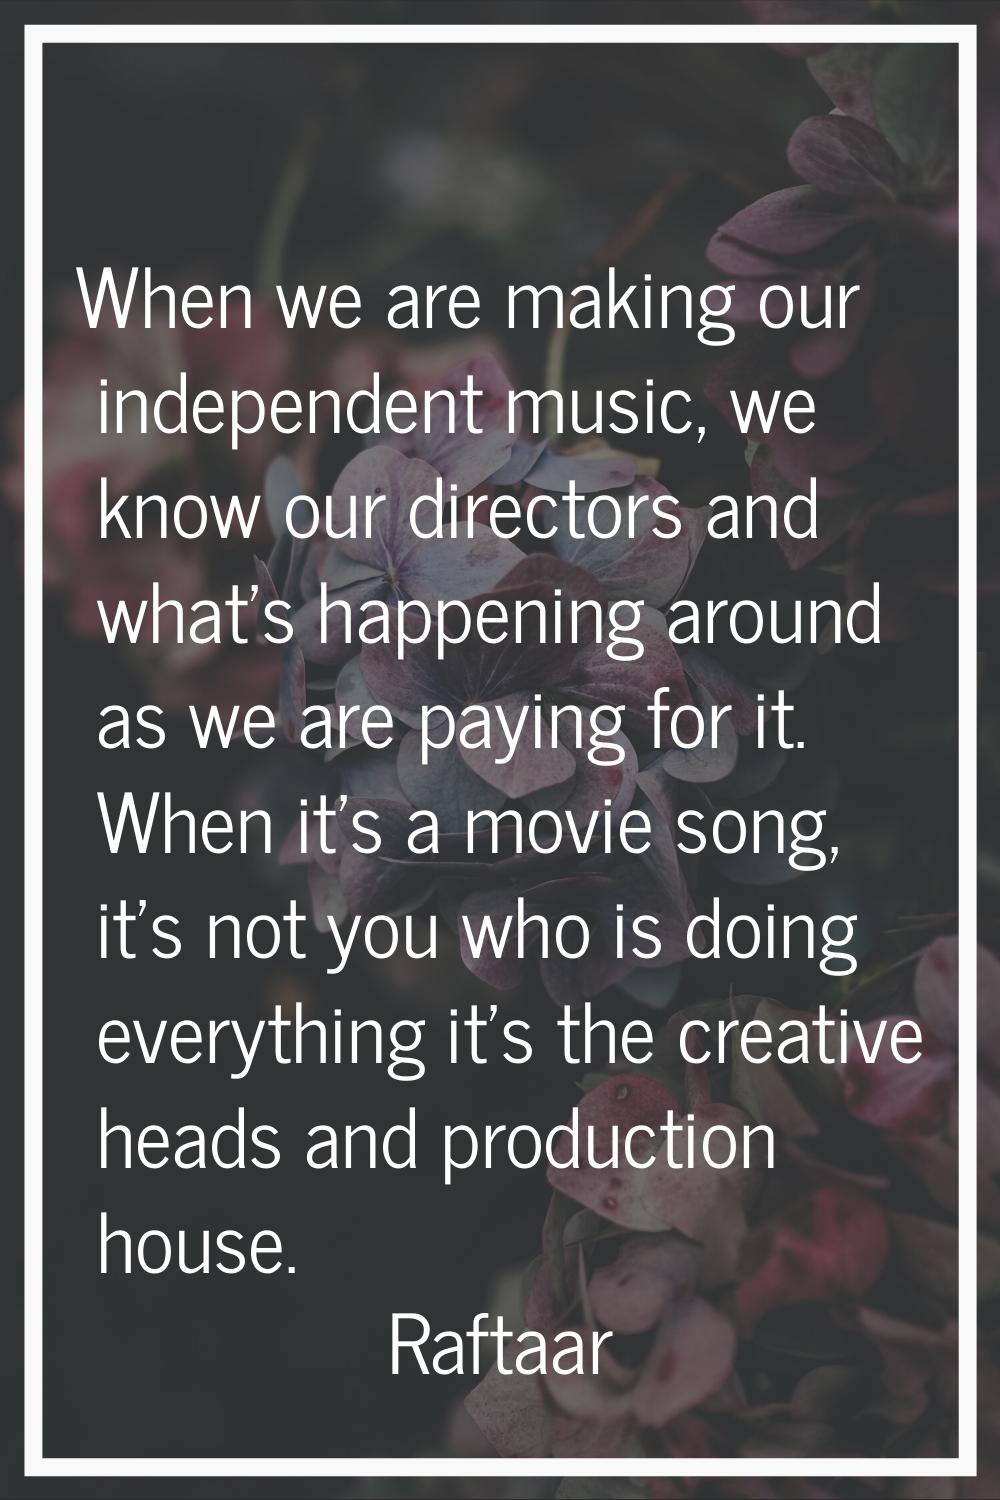 When we are making our independent music, we know our directors and what's happening around as we a